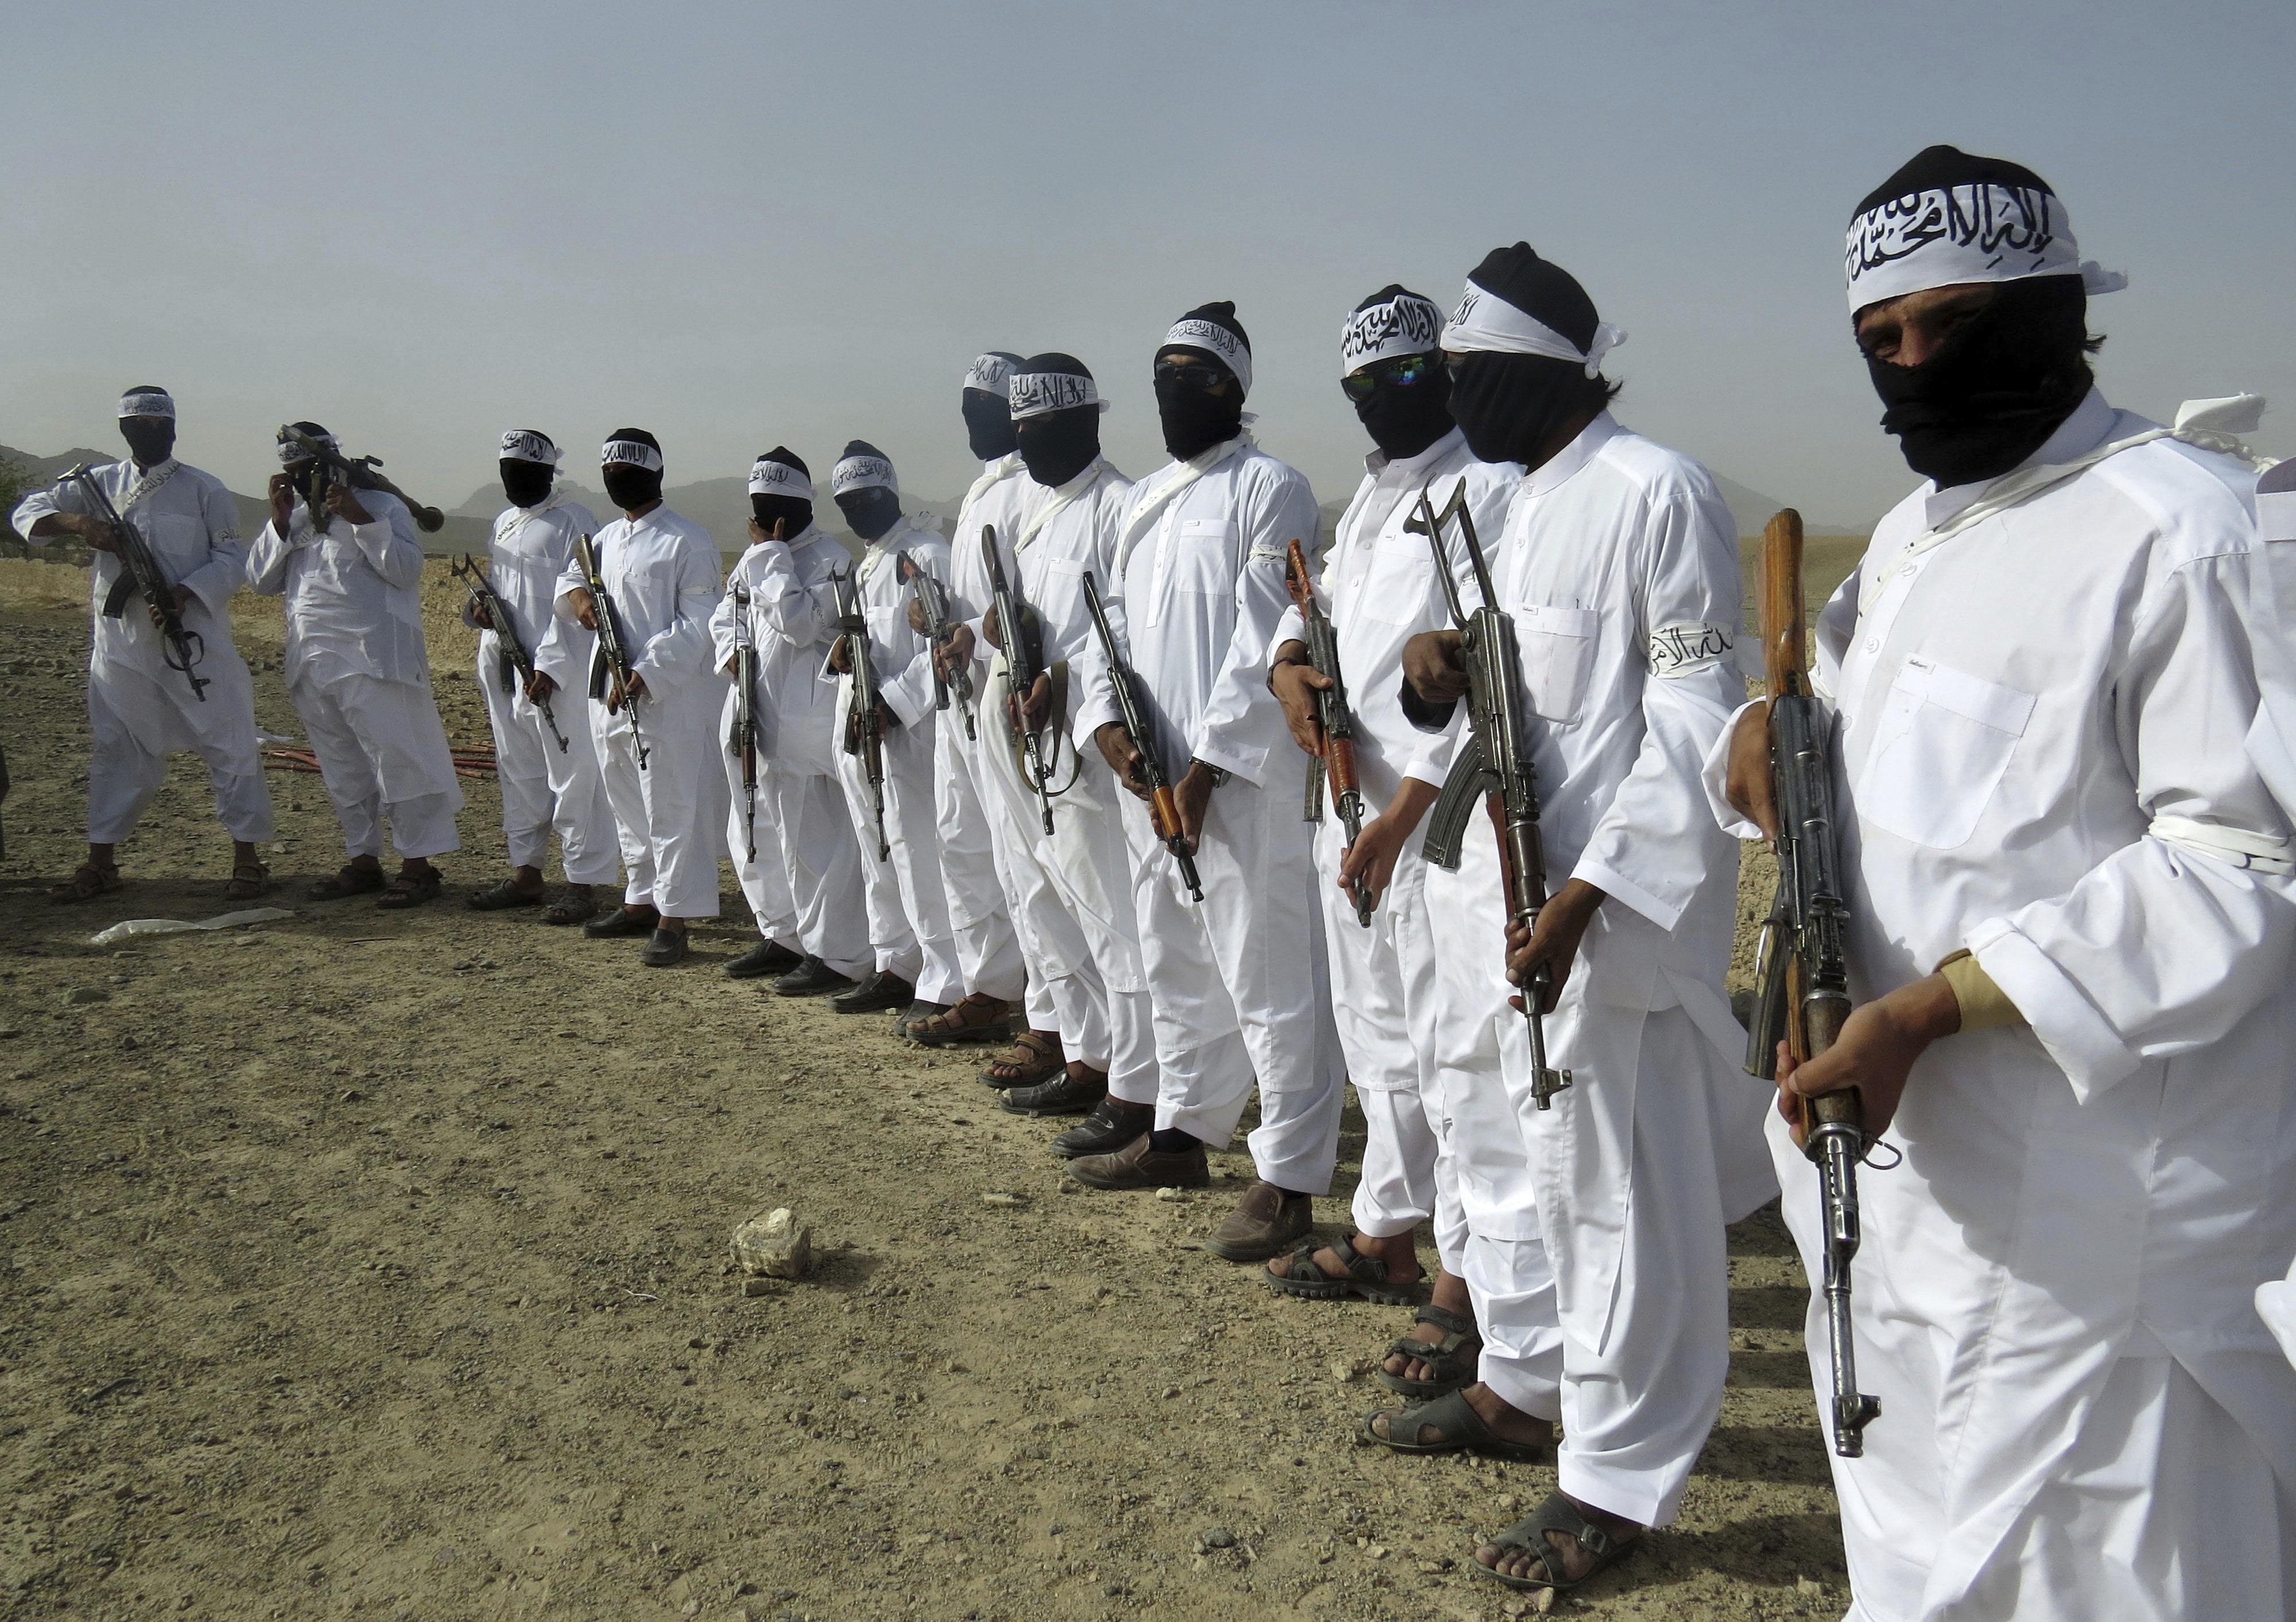 A file picture taken in August last year of Taliban suicide bombers standing guard during a gathering of a breakaway faction of the militant group in Zabul province, Afghanistan. Photo: Associated Press